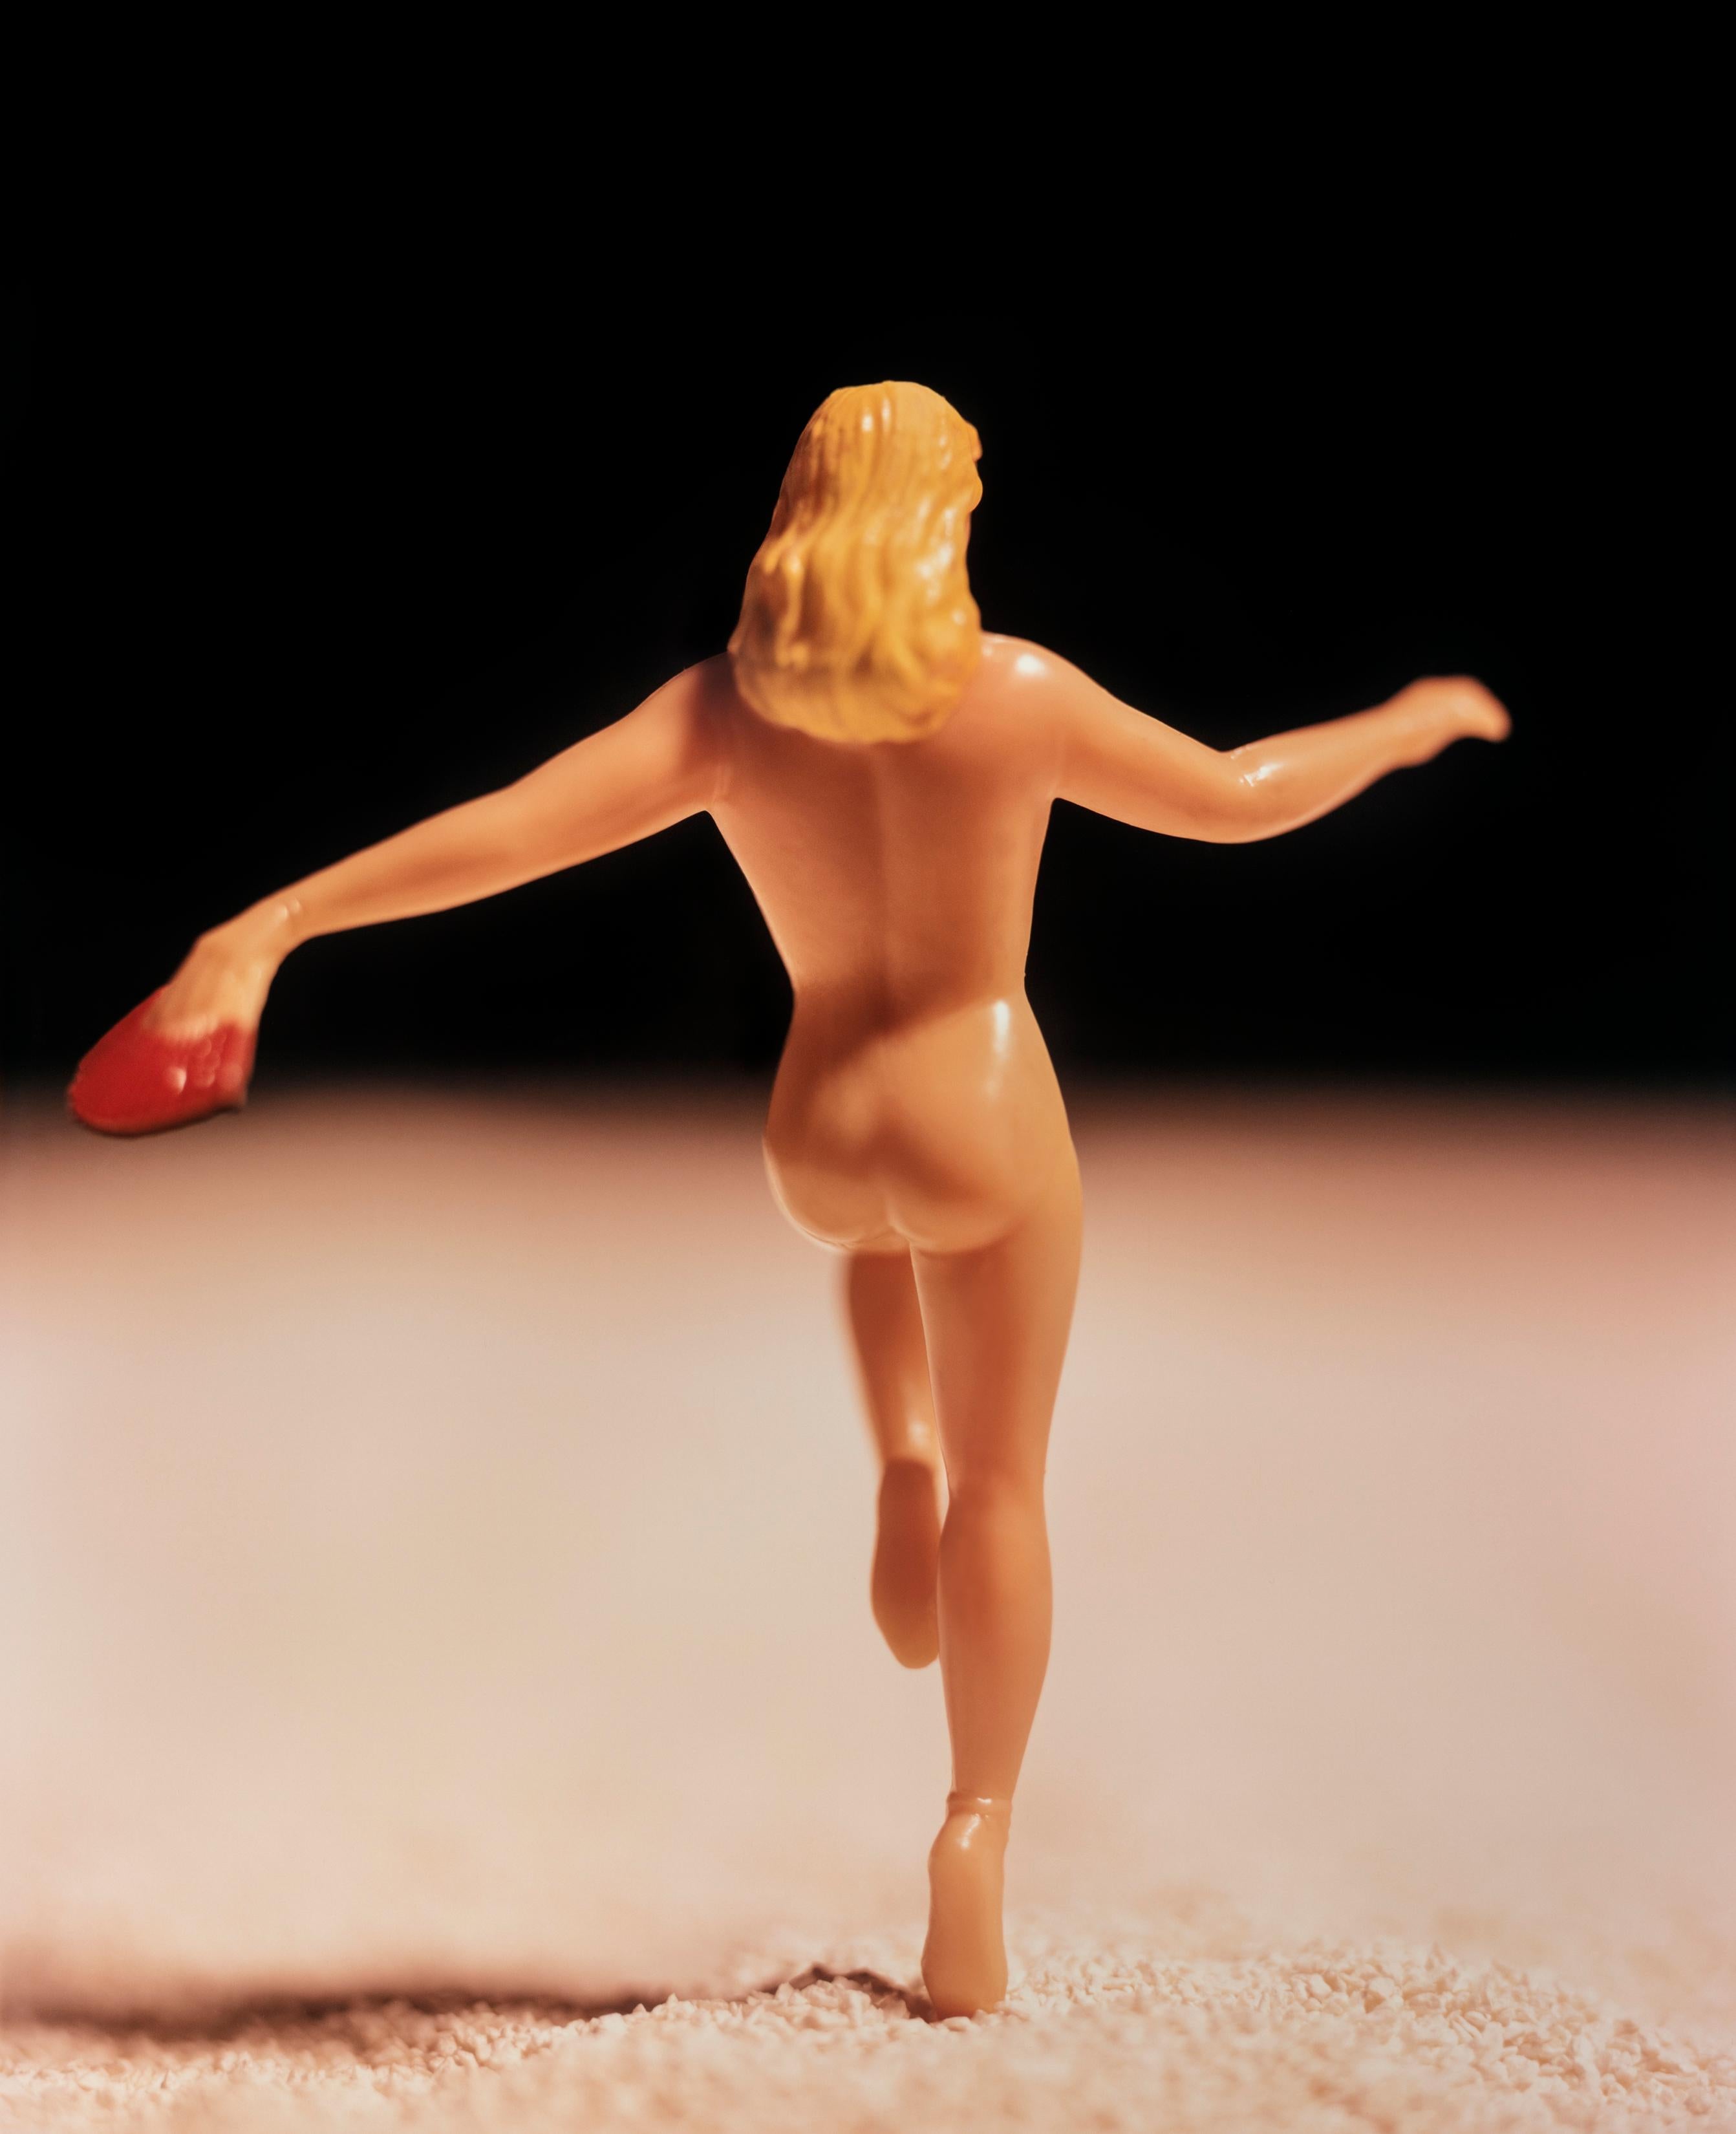 David Levinthal Figurative Photograph - Untitled from the series American Beauties 